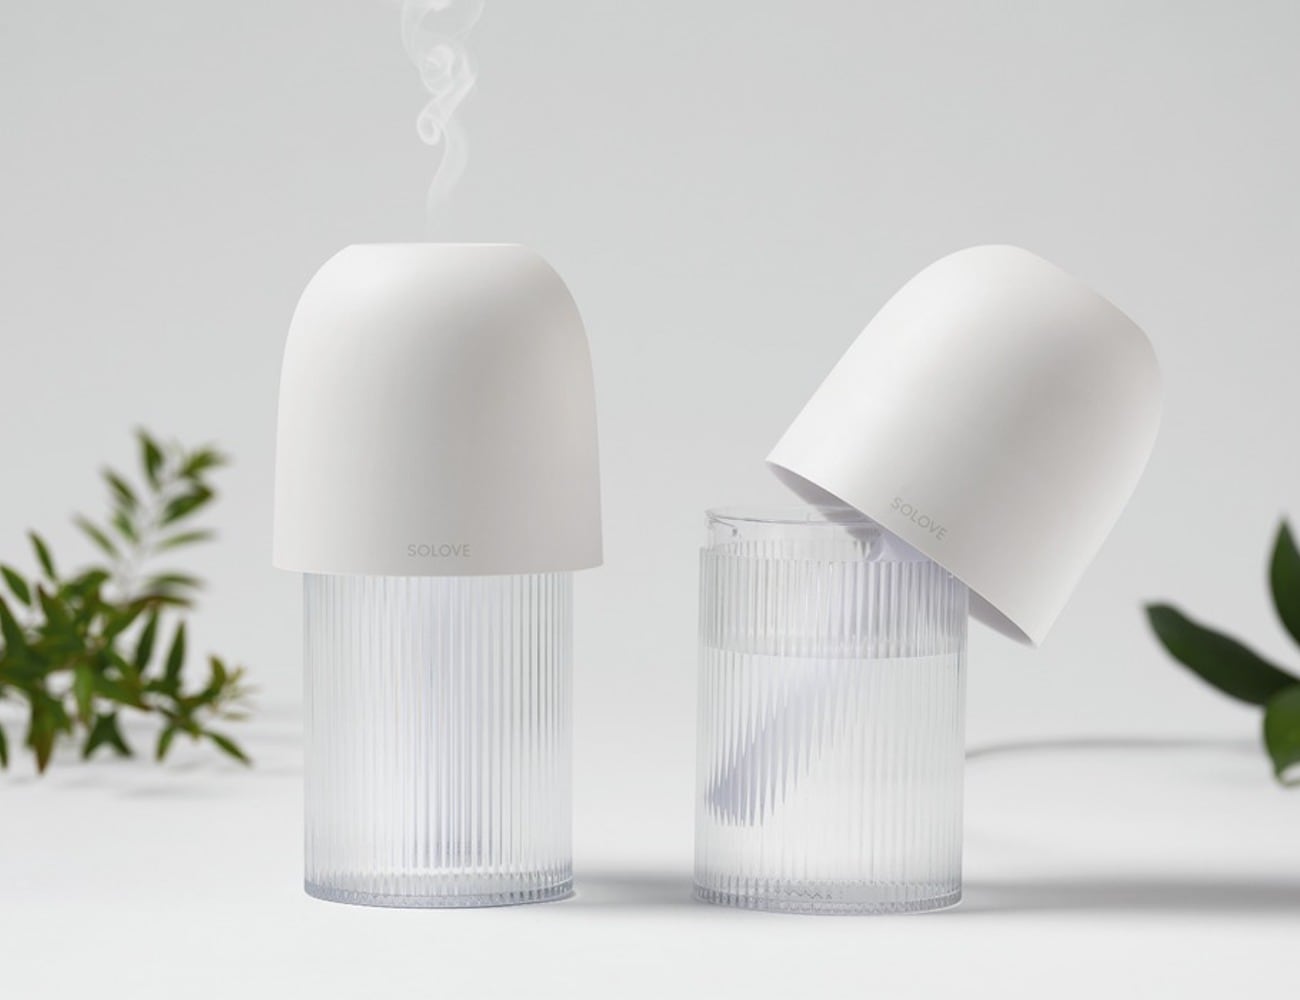 SOLOVE Humidifier 2 Minimal Air Humidifier enhances your space